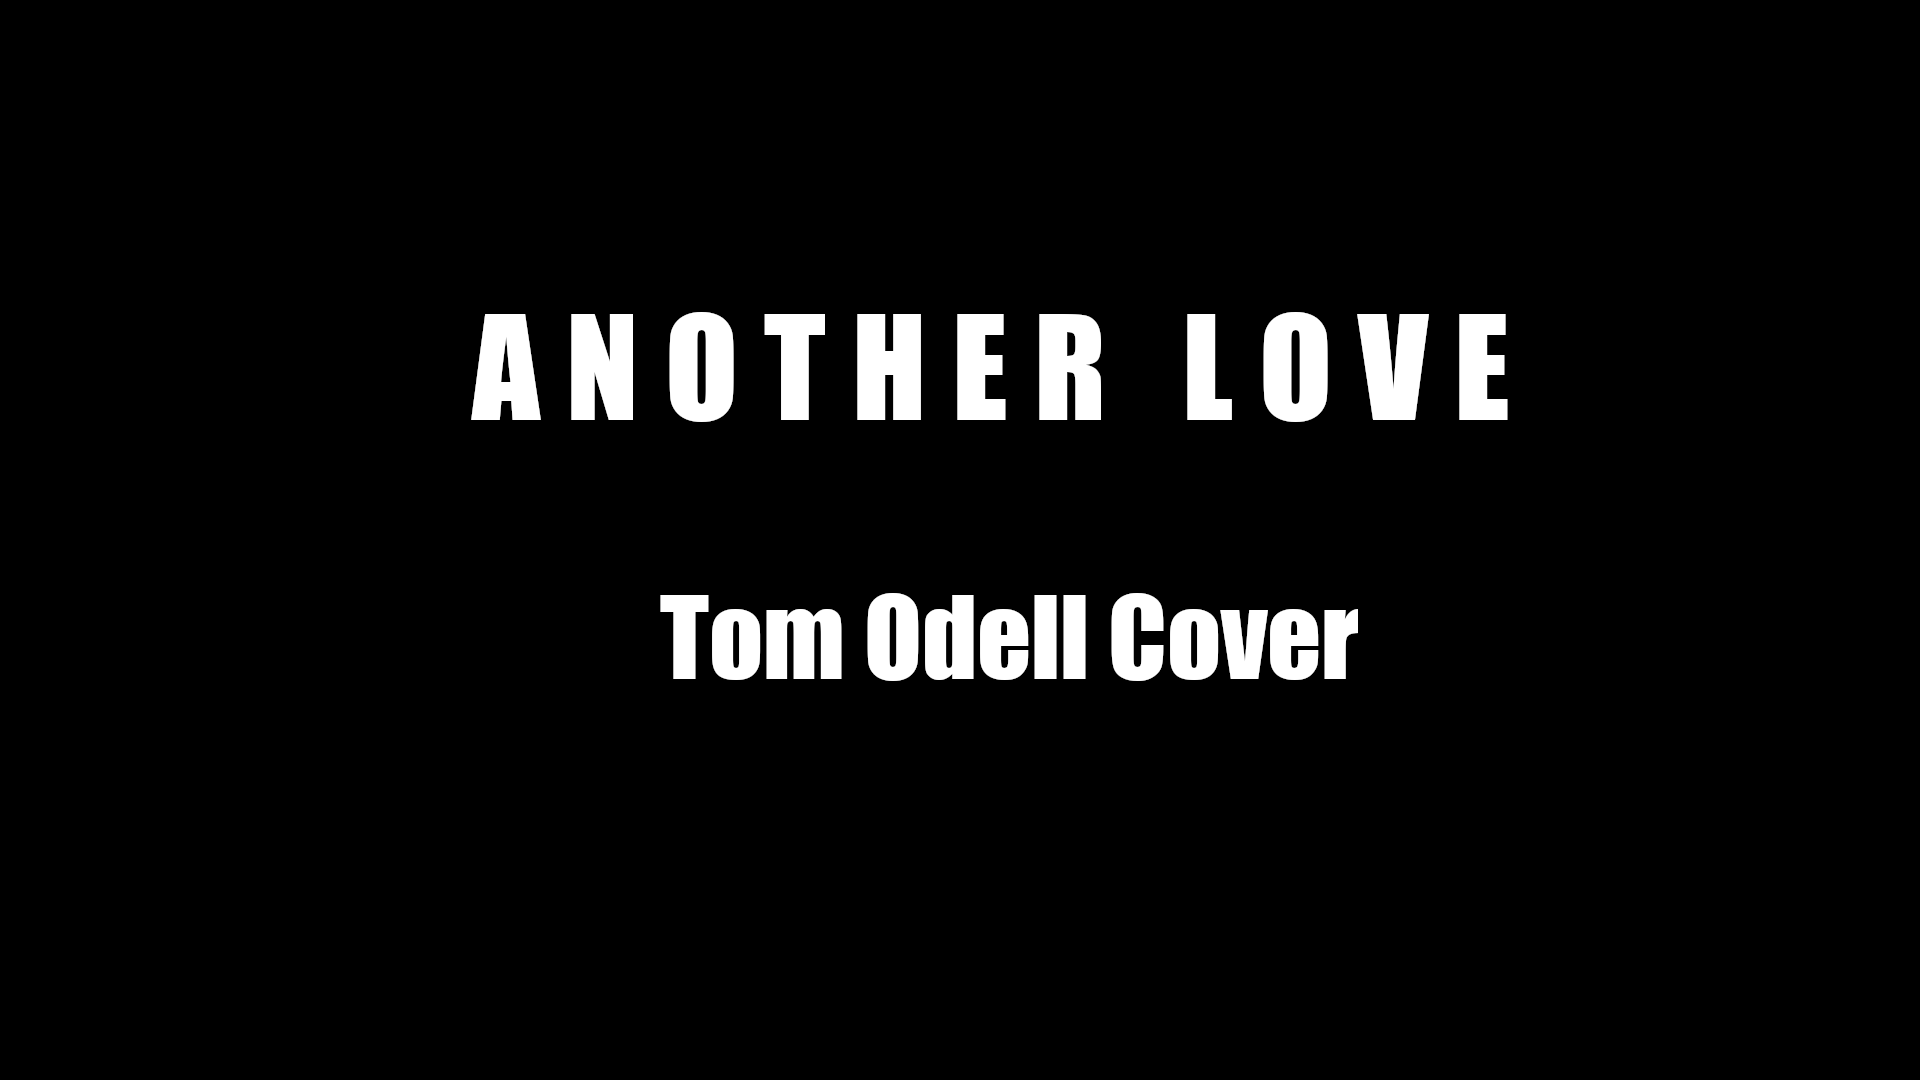 ANOTHER LOVE - TOM ODELL - PIANO VERSION